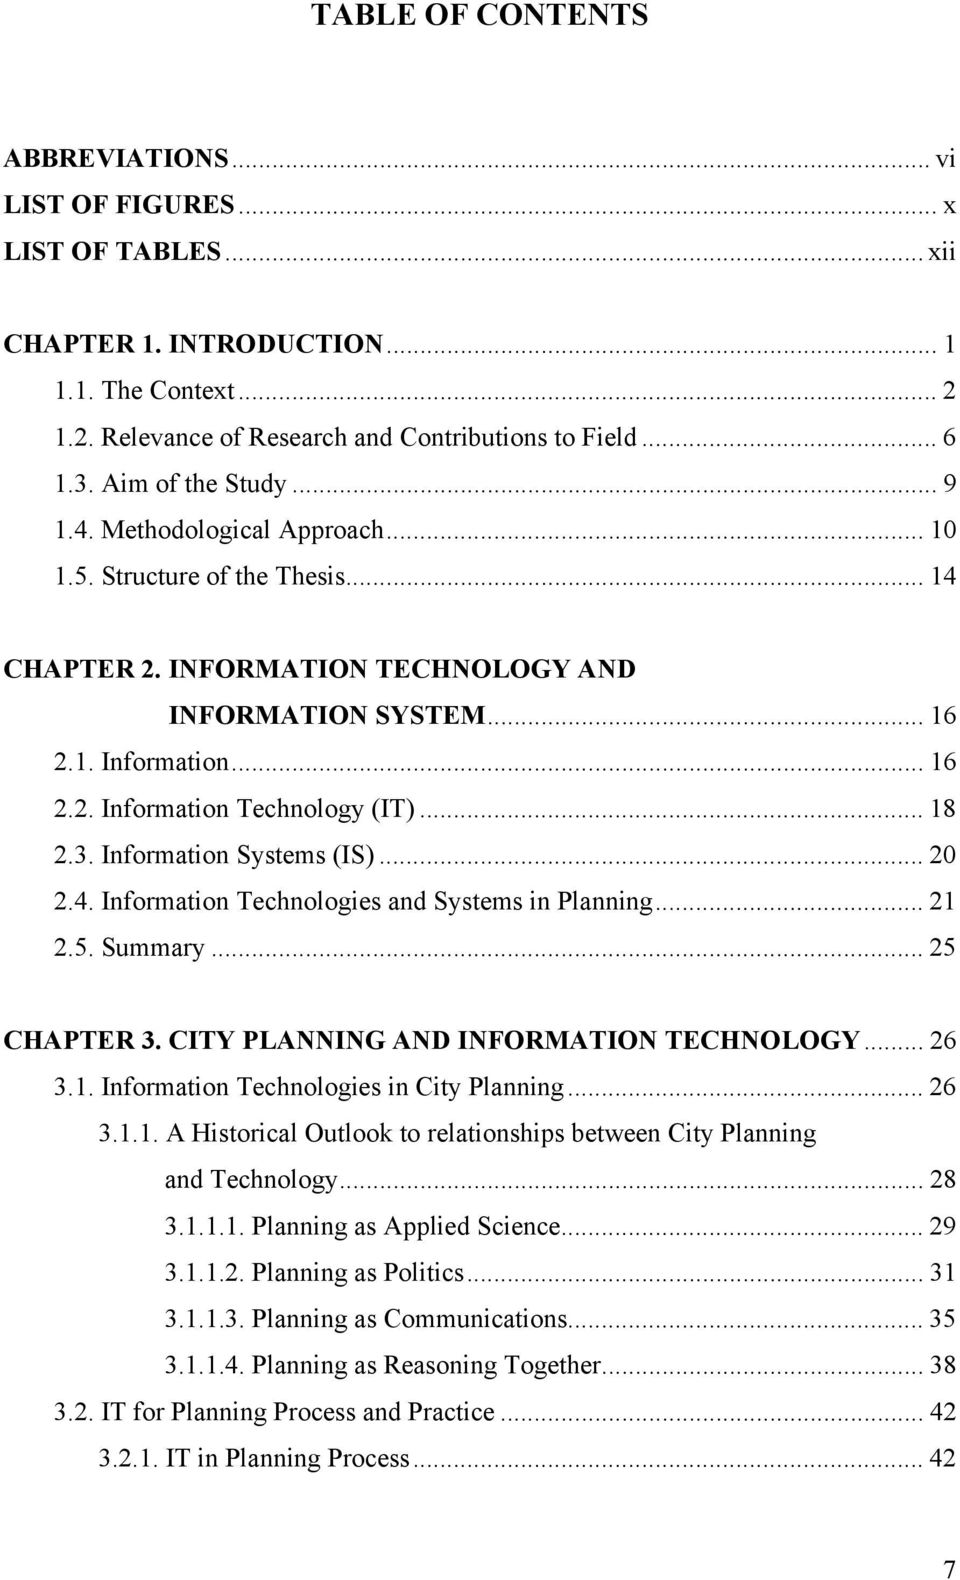 .. 18 2.3. Information Systems (IS)... 20 2.4. Information Technologies and Systems in Planning... 21 2.5. Summary... 25 CHAPTER 3. CITY PLANNING AND INFORMATION TECHNOLOGY... 26 3.1. Information Technologies in City Planning.